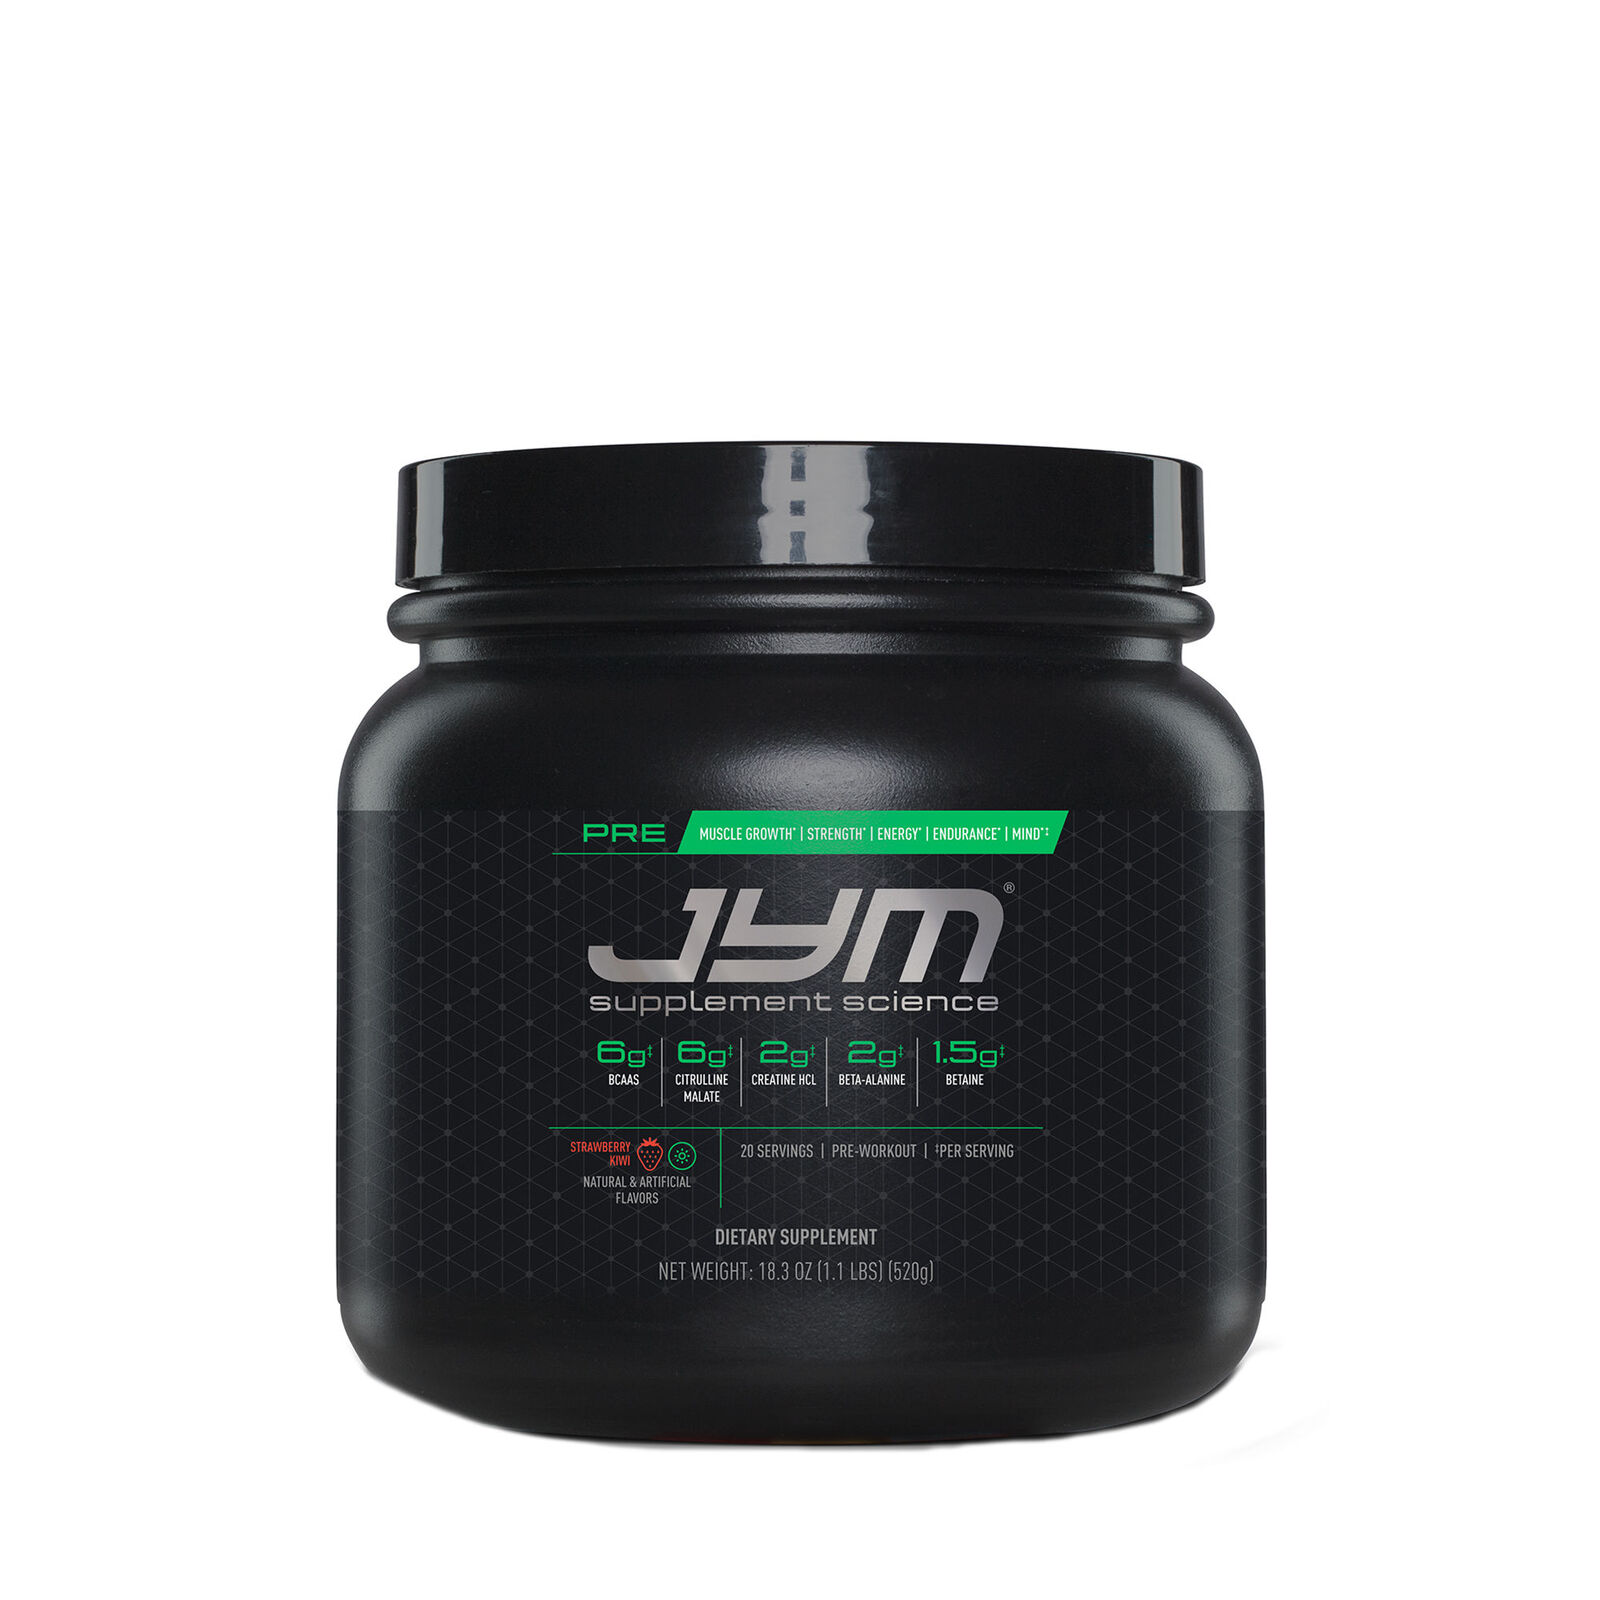  Pro Jym Pre Workout with Comfort Workout Clothes